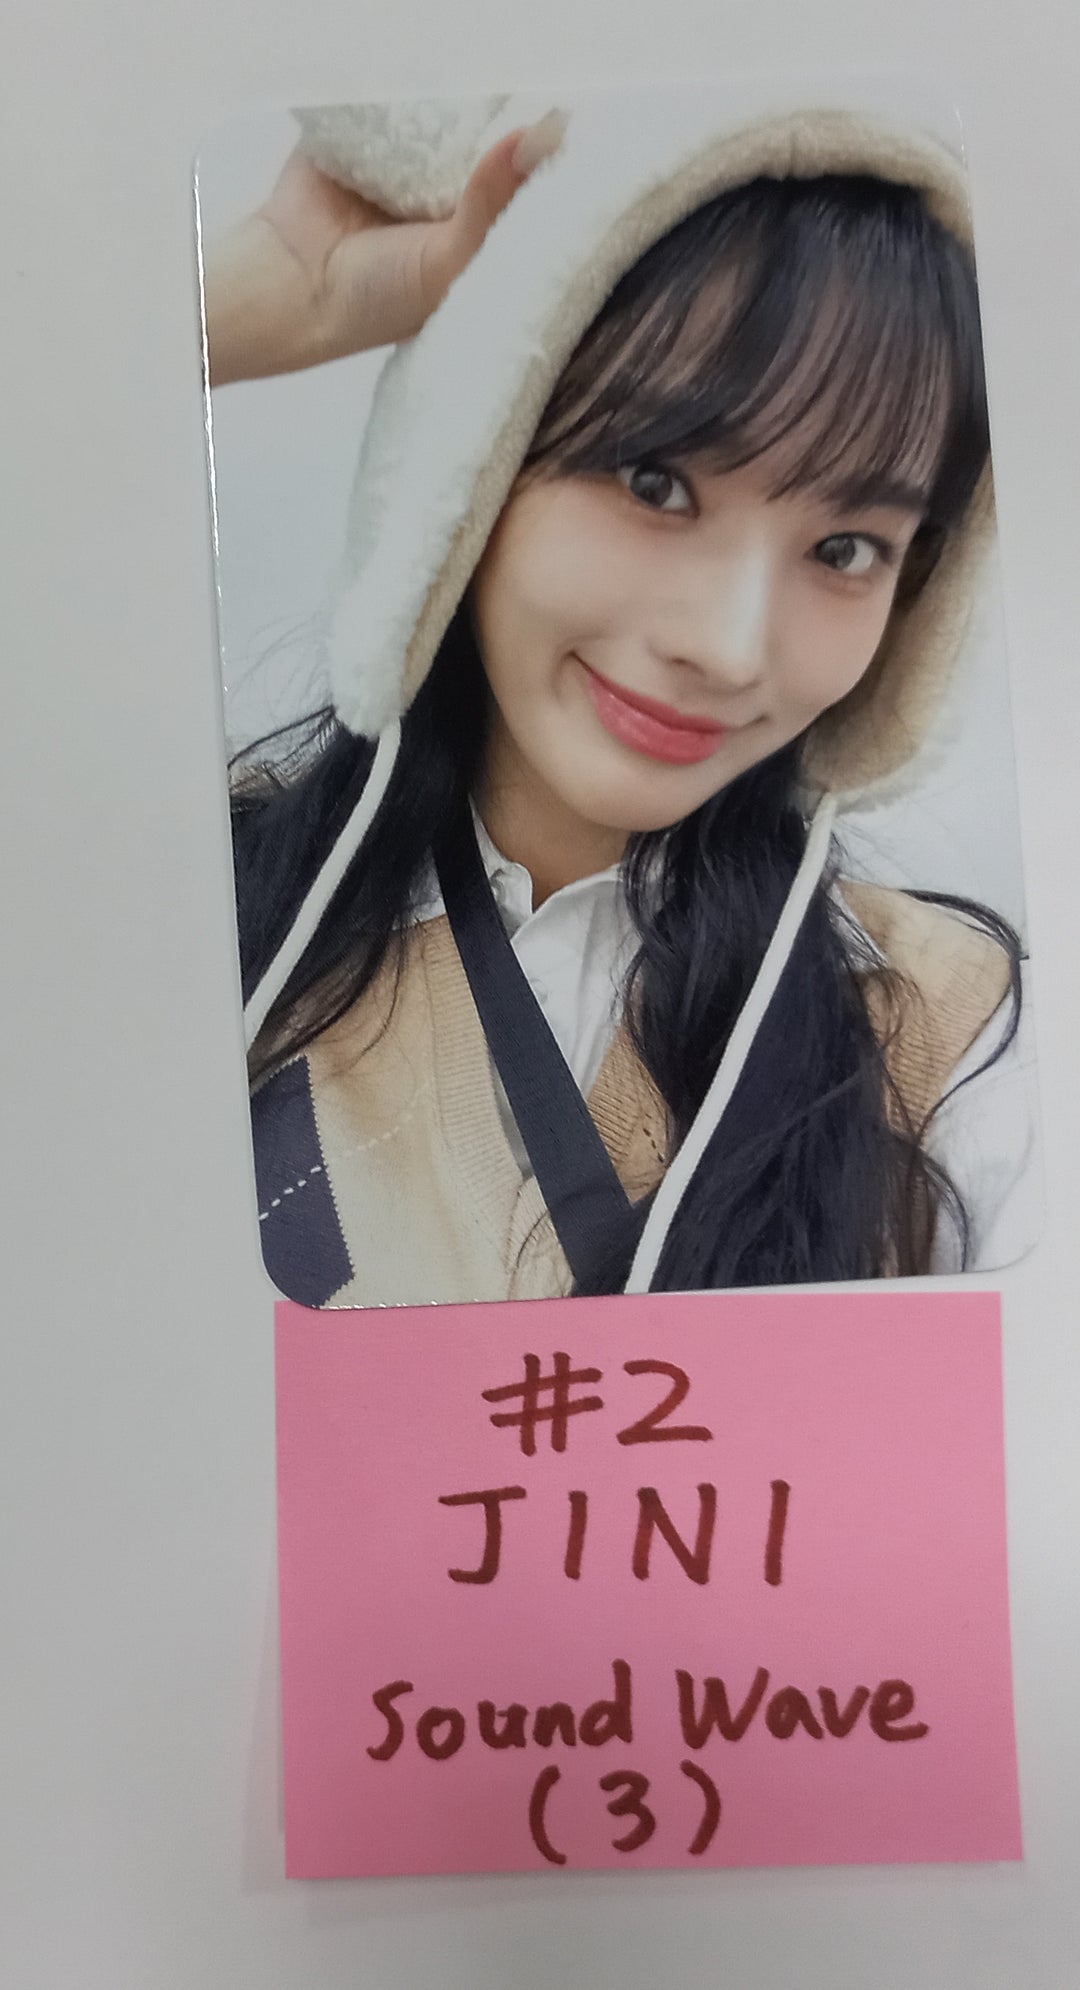 JINI "An Iron Hand In A Velvet Glove" - Soundwave Fansign Event Photocard Round 2 [23.10.31]